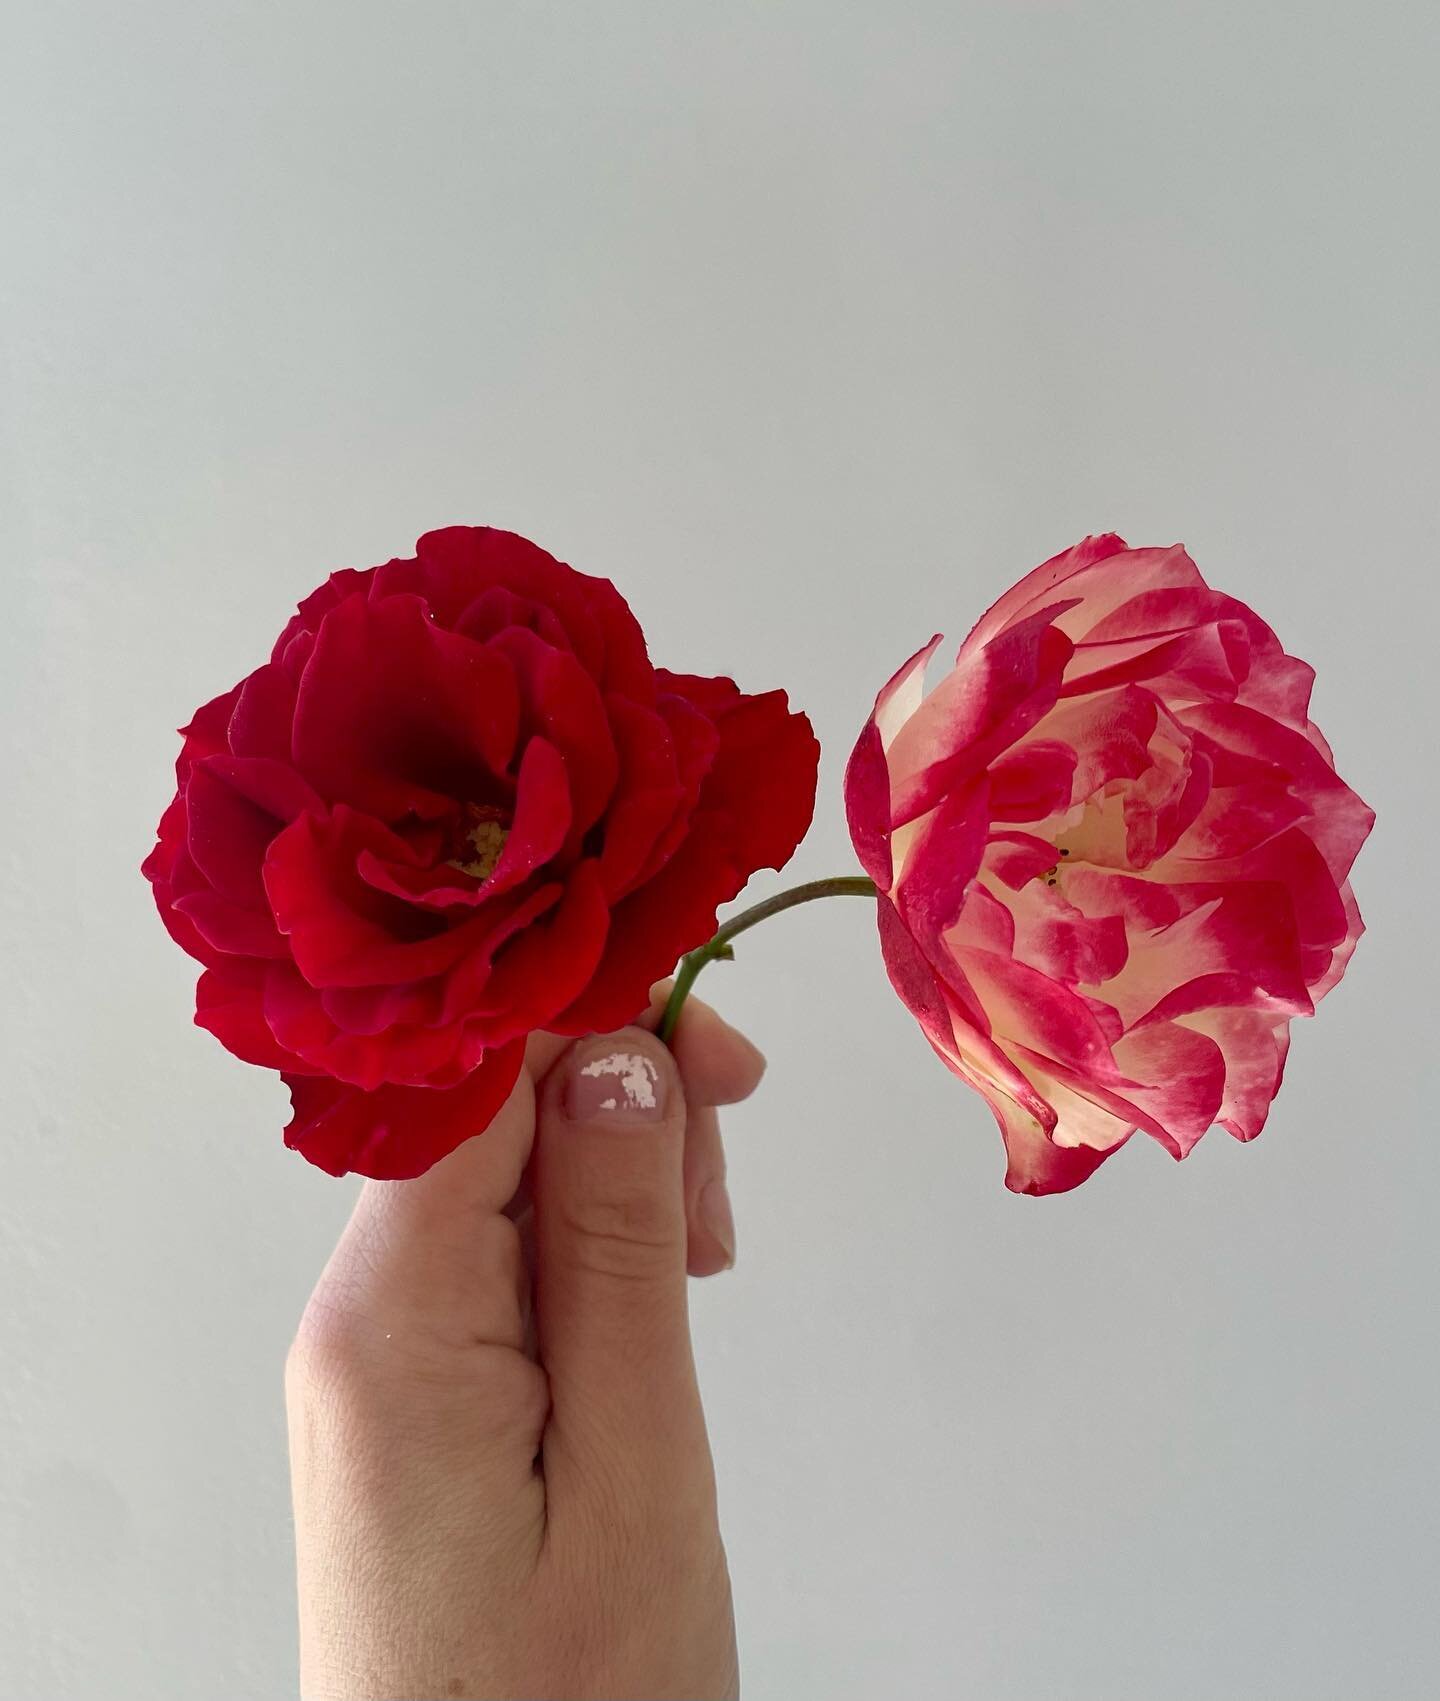 Roses were definitely my gateway flower. They just seem so DECADENT. And yet, they&rsquo;ve been some of the most hardy and least persnickety flowers I&rsquo;ve planted on my own property. I imagine it&rsquo;s different to sell them&mdash;they&rsquo;